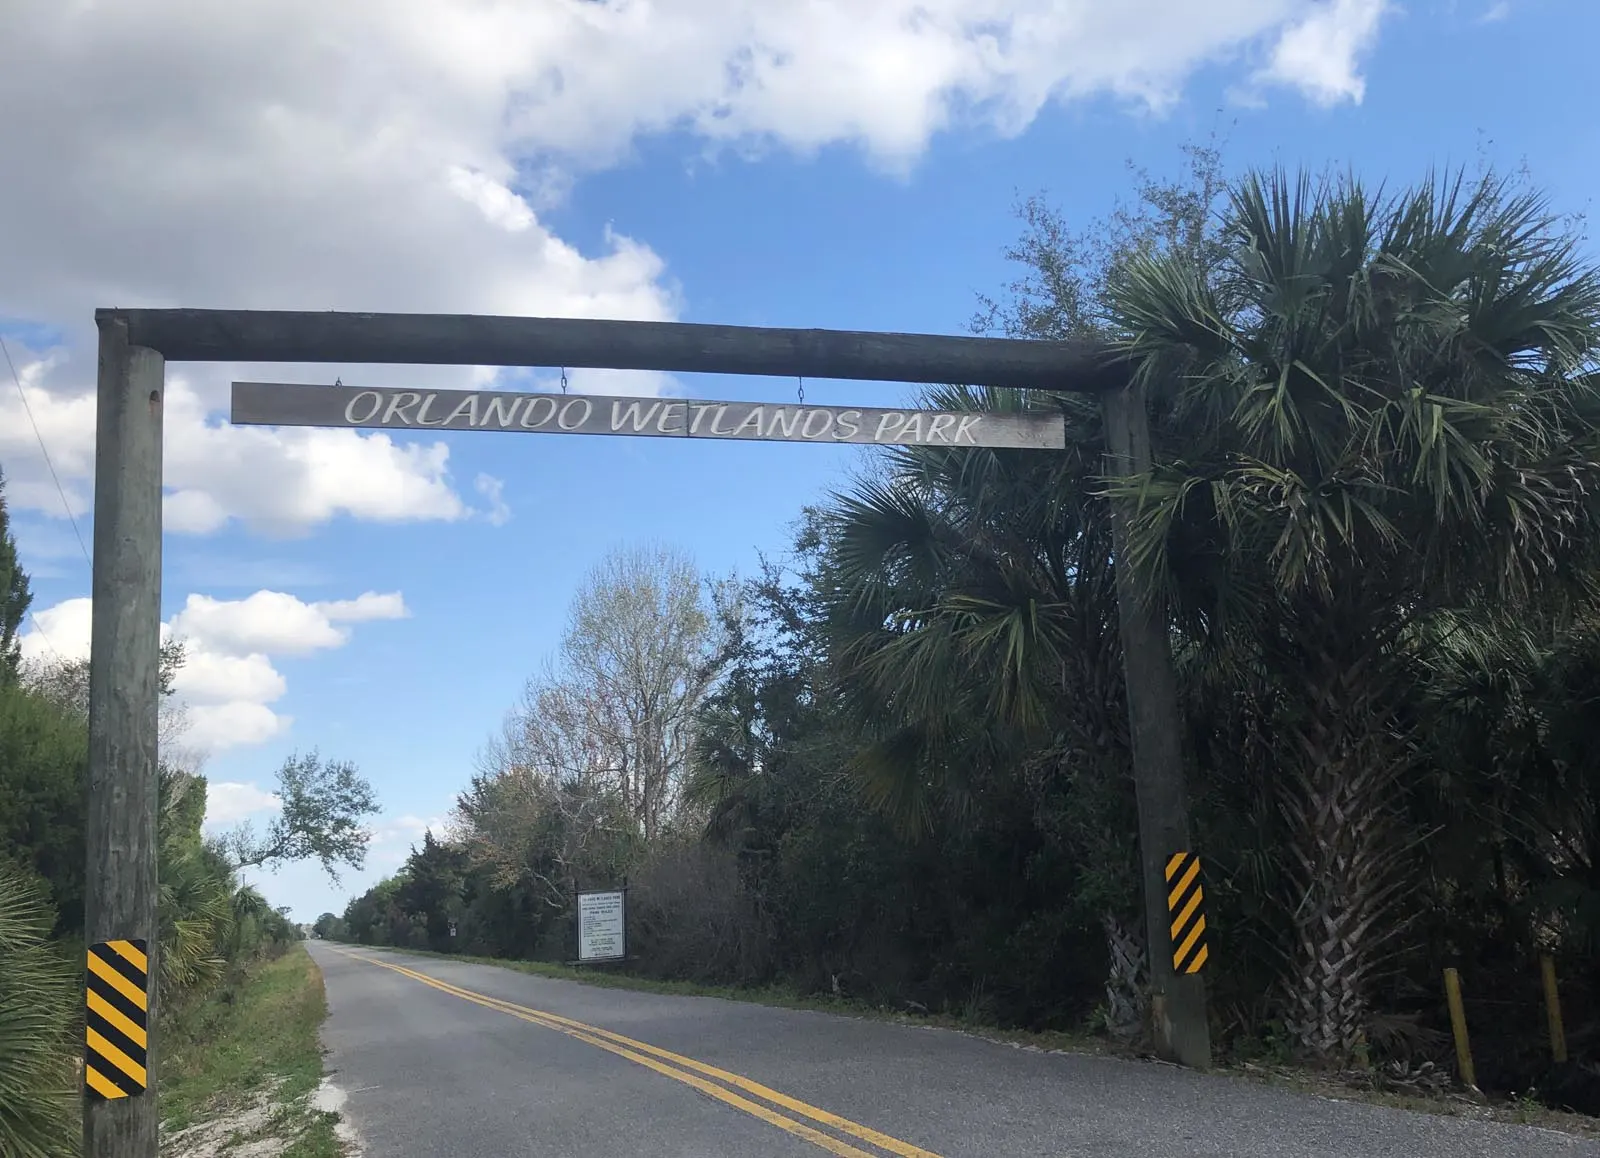 This unimposing sign over a street in Christmas lets you know you’ve arrived at an amazing place for seeing wildlife. (Photo: Deborah Hartz-Seeley)